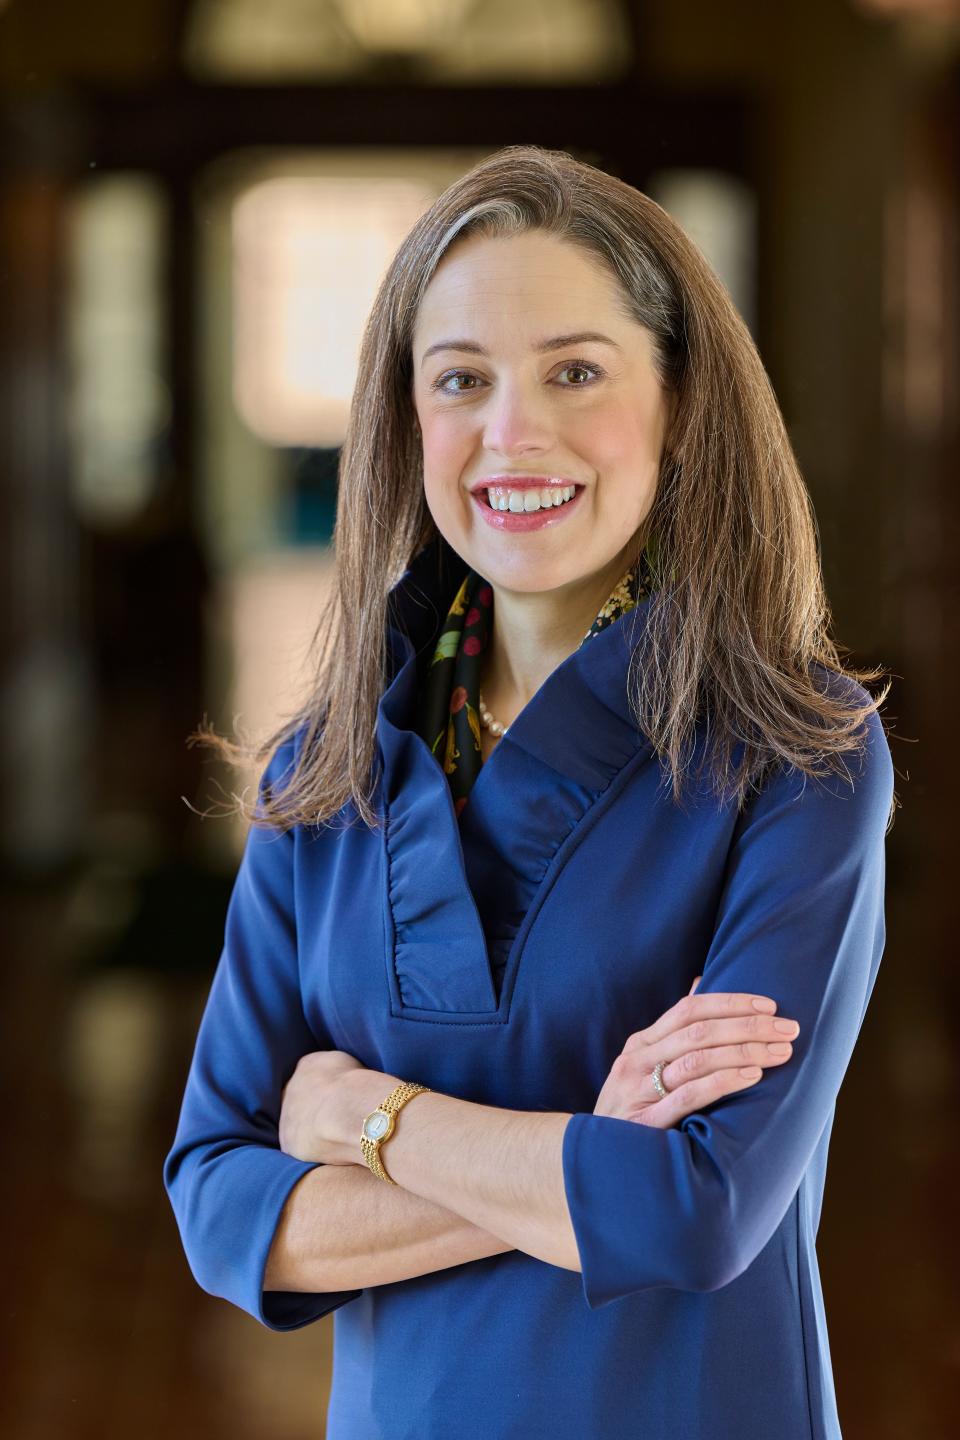 Sarah D. A. Baker will become Tower Hill School's newest head of school on July 1. She is the eleventh individual to hold the title in the school's 103-year history.